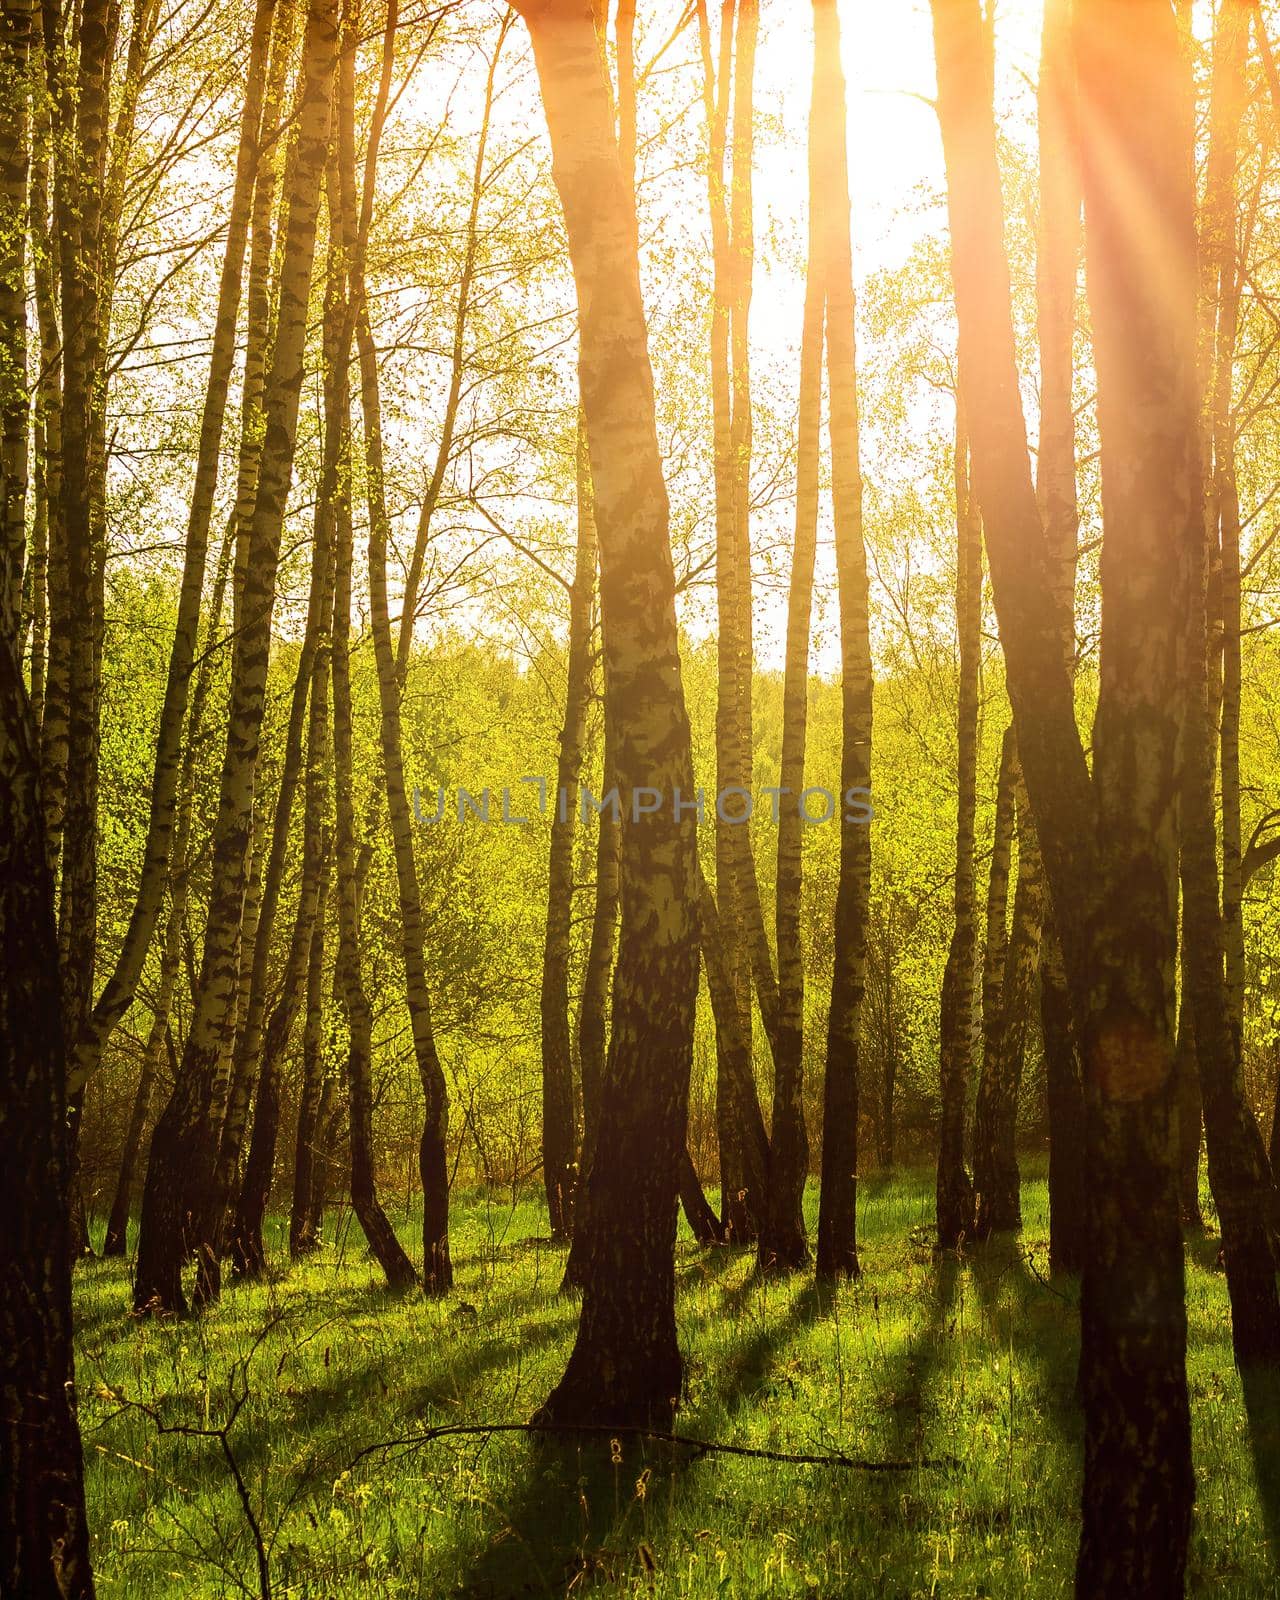 Sunrise or sunset in a spring birch grove with young green foliage and grass. Sun rays breaking through the birch trees.